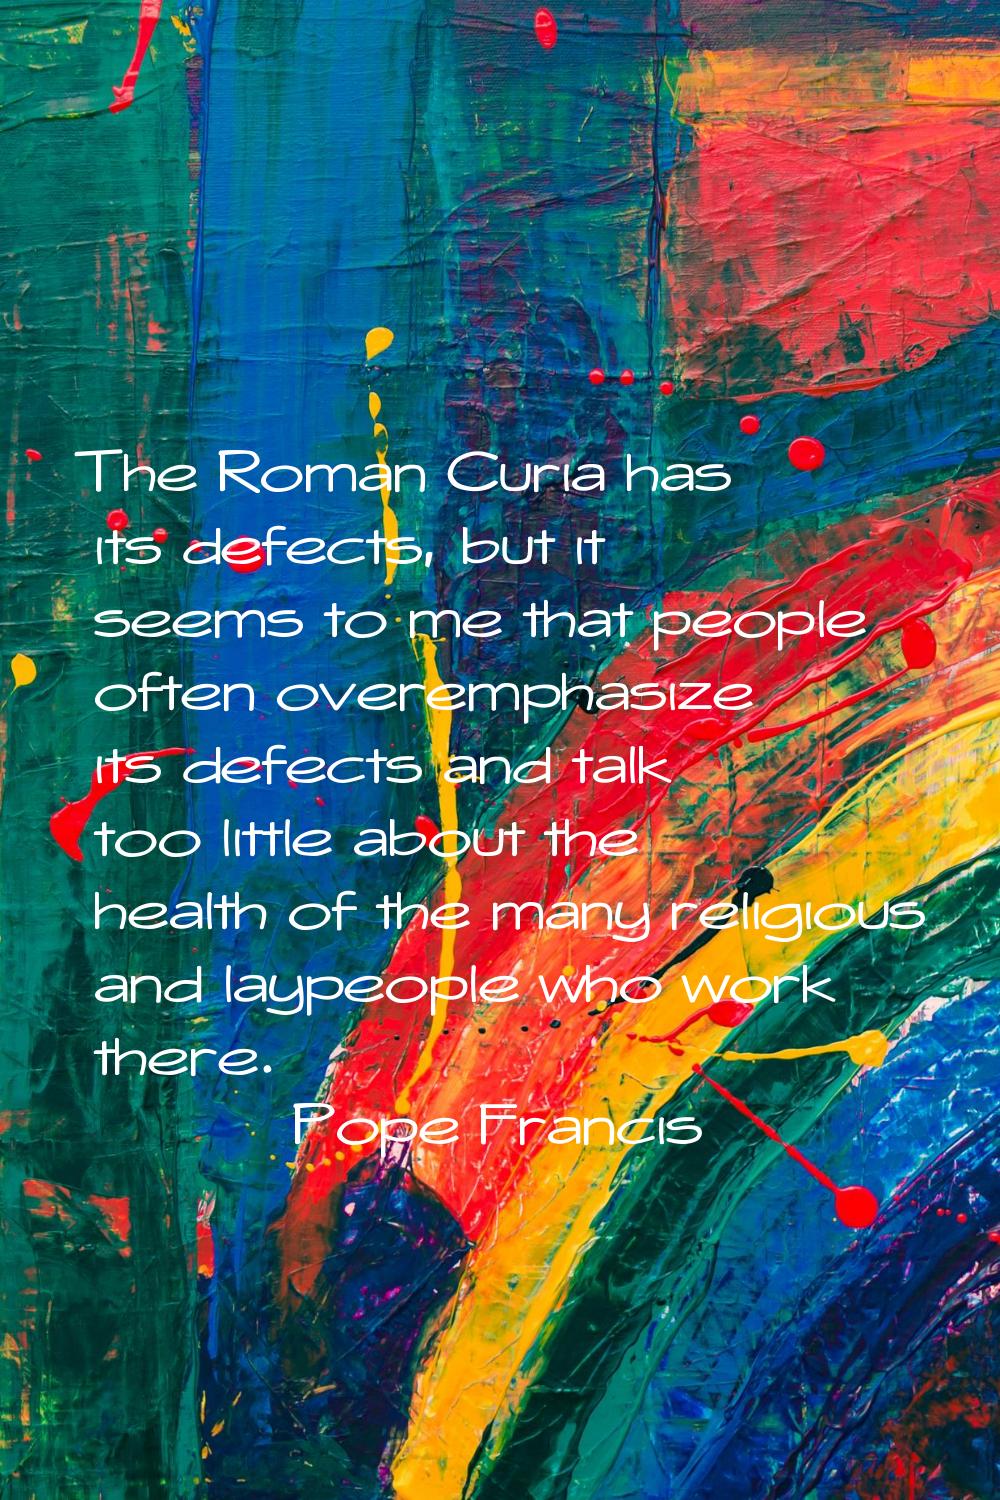 The Roman Curia has its defects, but it seems to me that people often overemphasize its defects and